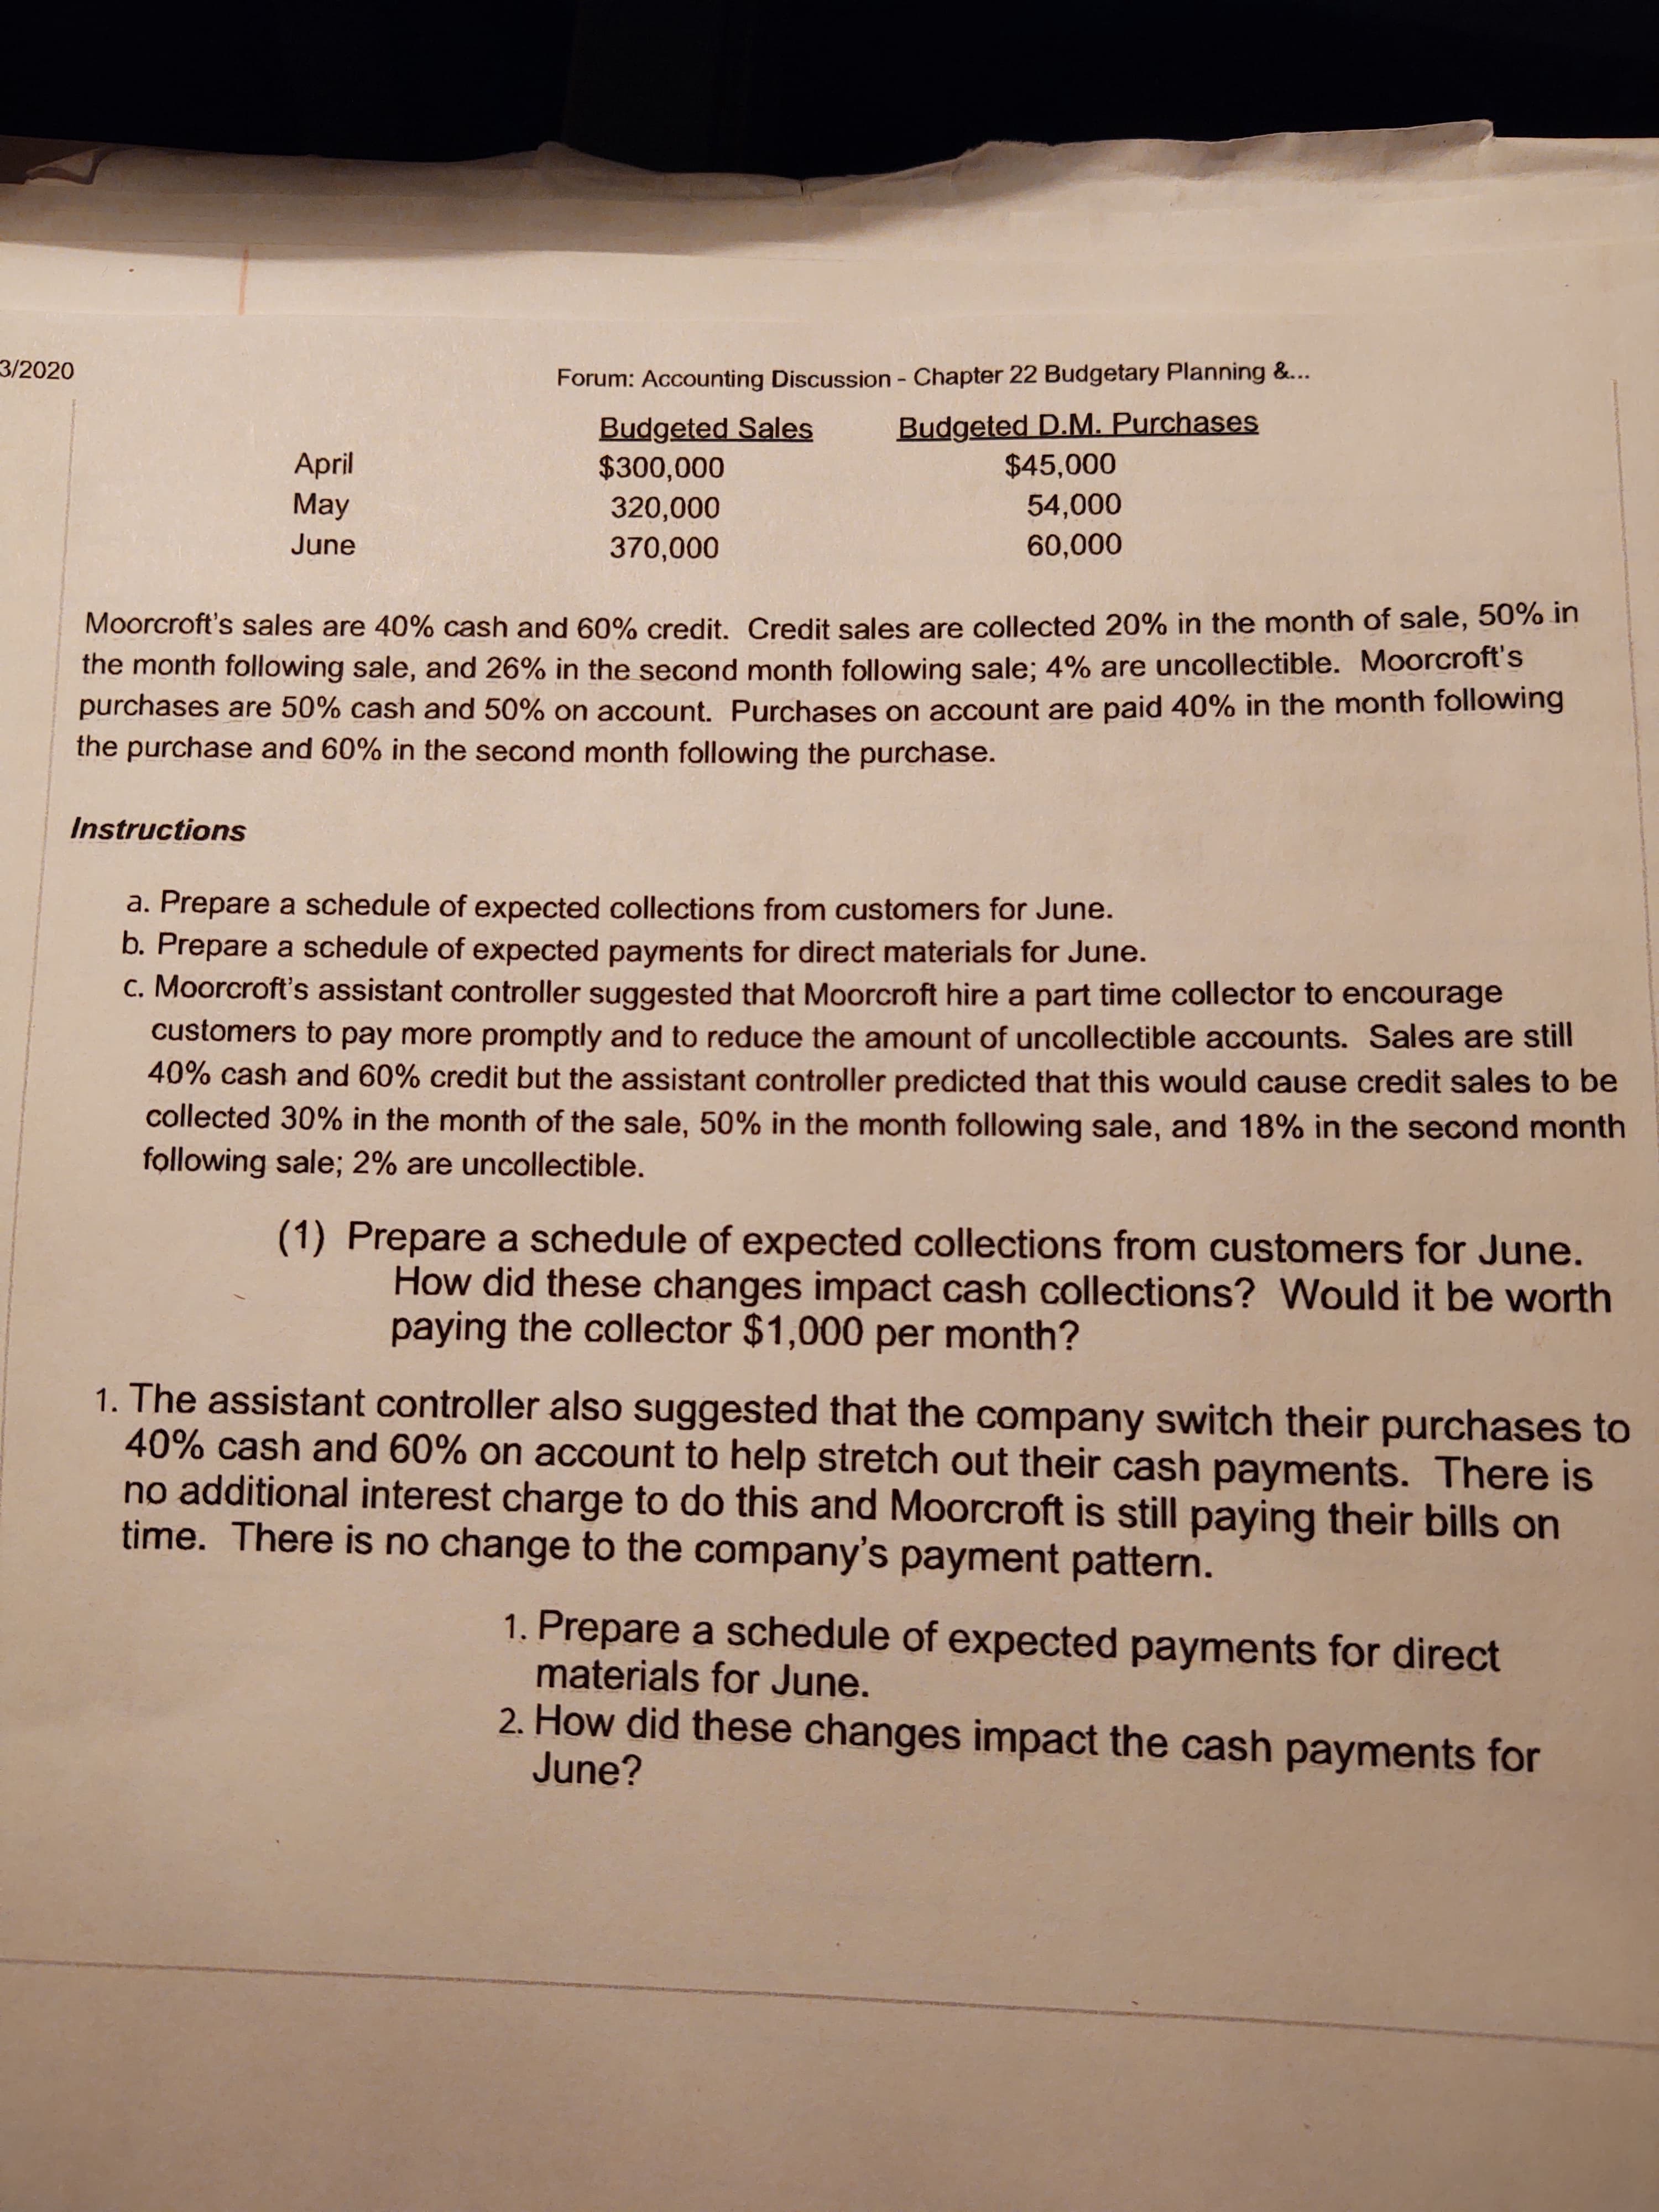 3/2020
Forum: Accounting Discussion - Chapter 22 Budgetary Planning &...
Budgeted Sales
$300,000
Budgeted D.M. Purchases
$45,000
April
May
320,000
54,000
June
370,000
60,000
Moorcroft's sales are 40% cash and 60% credit, Credit sales are collected 20% in the month of sale, 50% in
the month following sale, and 26% in the second month following sale; 4% are uncollectible. Moorcroft's
purchases are 50% cash and 50% on account. Purchases on account are paid 40% in the month following
the purchase and 60% in the second month following the purchase.
Instructions
a. Prepare a schedule of expected collections from customers for June.
b. Prepare a schedule of expected payments for direct materials for June.
c. Moorcroft's assistant controller suggested that Moorcroft hire a part time collector to encourage
customers to pay more promptly and to reduce the amount of uncollectible accounts. Sales are still
40% cash and 60% credit but the assistant controller predicted that this would cause credit sales to be
collected 30% in the month of the sale, 50% in the month following sale, and 18% in the second month
following sale; 2% are uncollectible.
(1) Prepare a schedule of expected collections from customers for June.
How did these changes impact cash collections? Would it be worth
paying the collector $1,000 per month?
1. The assistant controller also suggested that the company switch their purchases to
40% cash and 60% on account to help stretch out their cash payments. There is
no additional interest charge to do this and Moorcroft is still paying their bills on
time. There is no change to the company's payment pattern.
1. Prepare a schedule of expected payments for direct
materials for June.
2. How did these changes impact the cash payments for
June?
